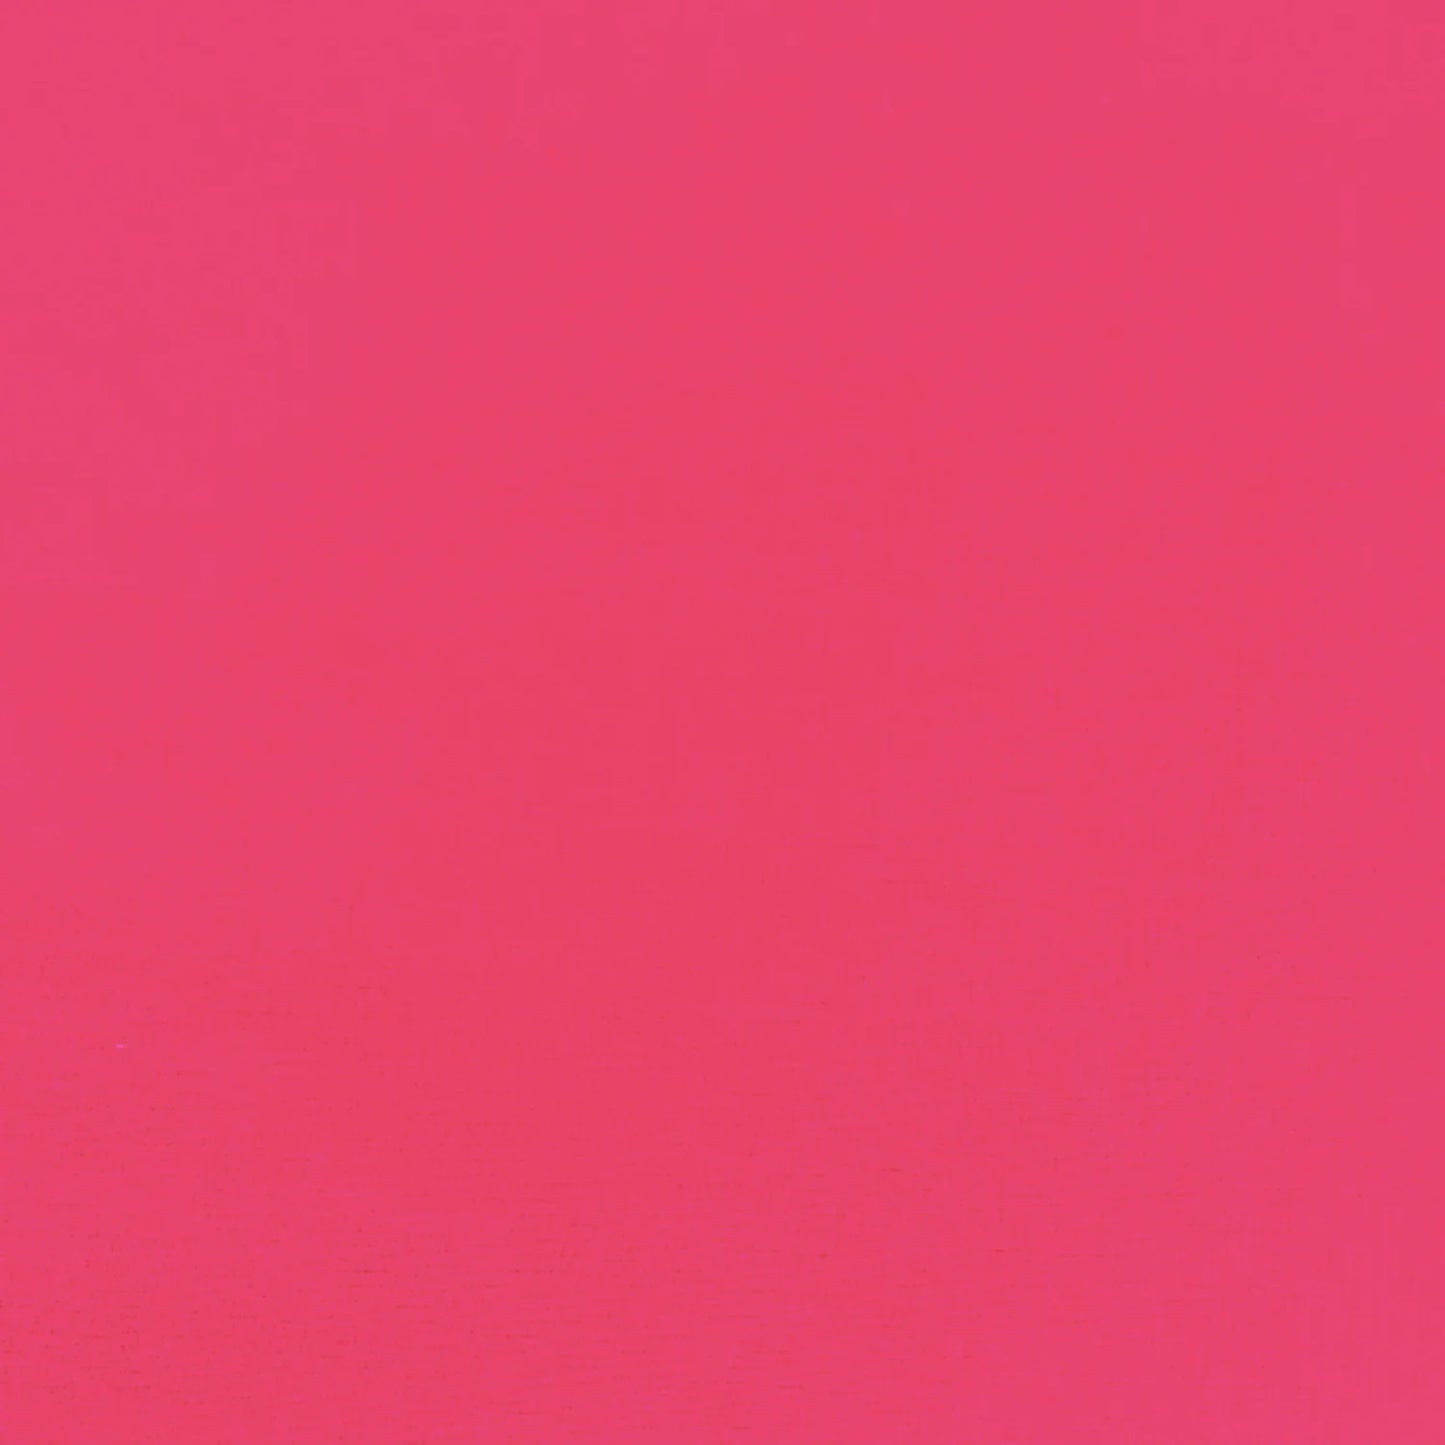 Solid Hot Pink 100% Cotton Fabric